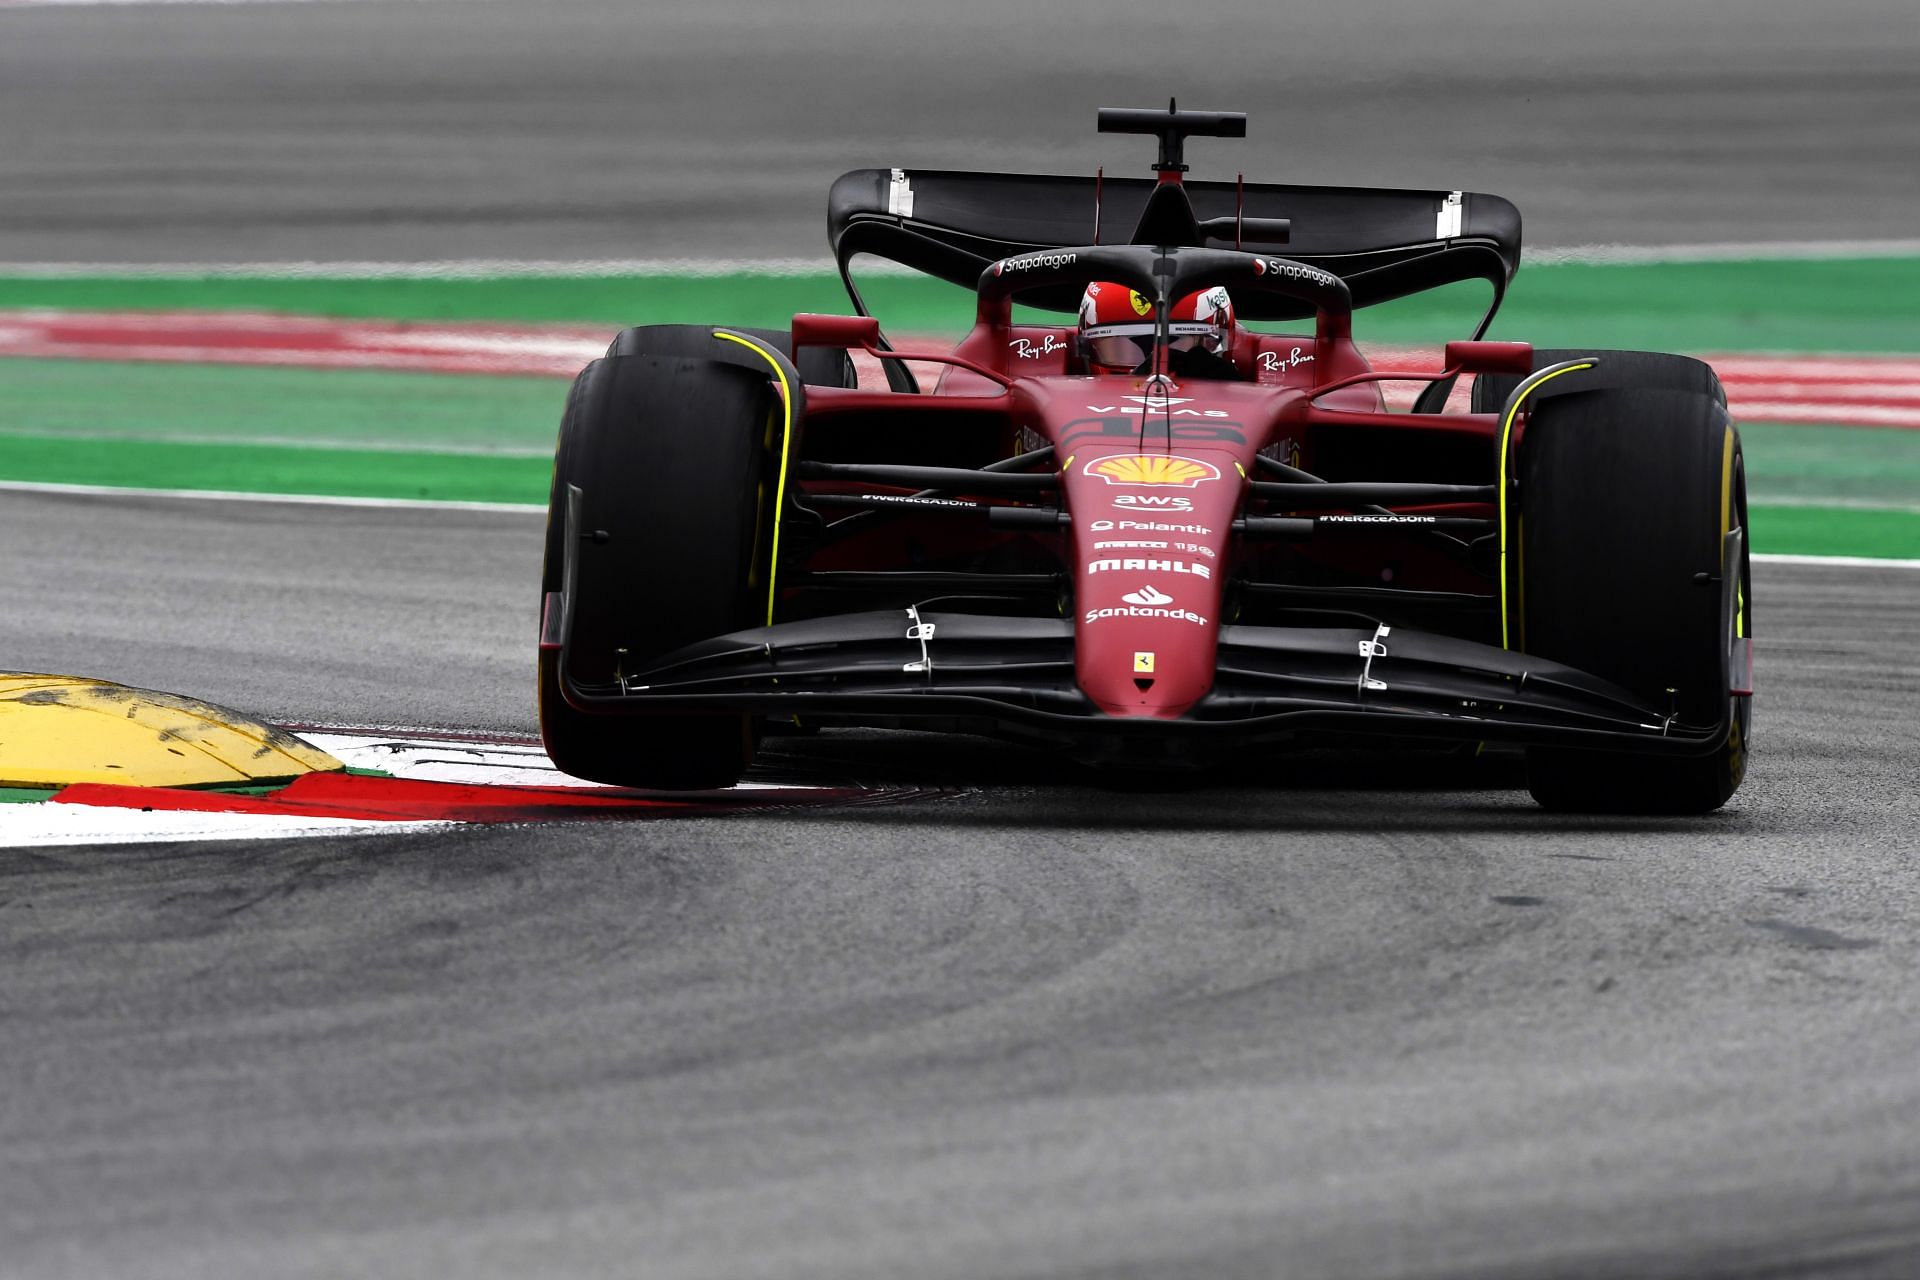 Charles Leclerc in action during the first pre-season testing session of 2022 (Photo by Rudy Carezzevoli/Getty Images)